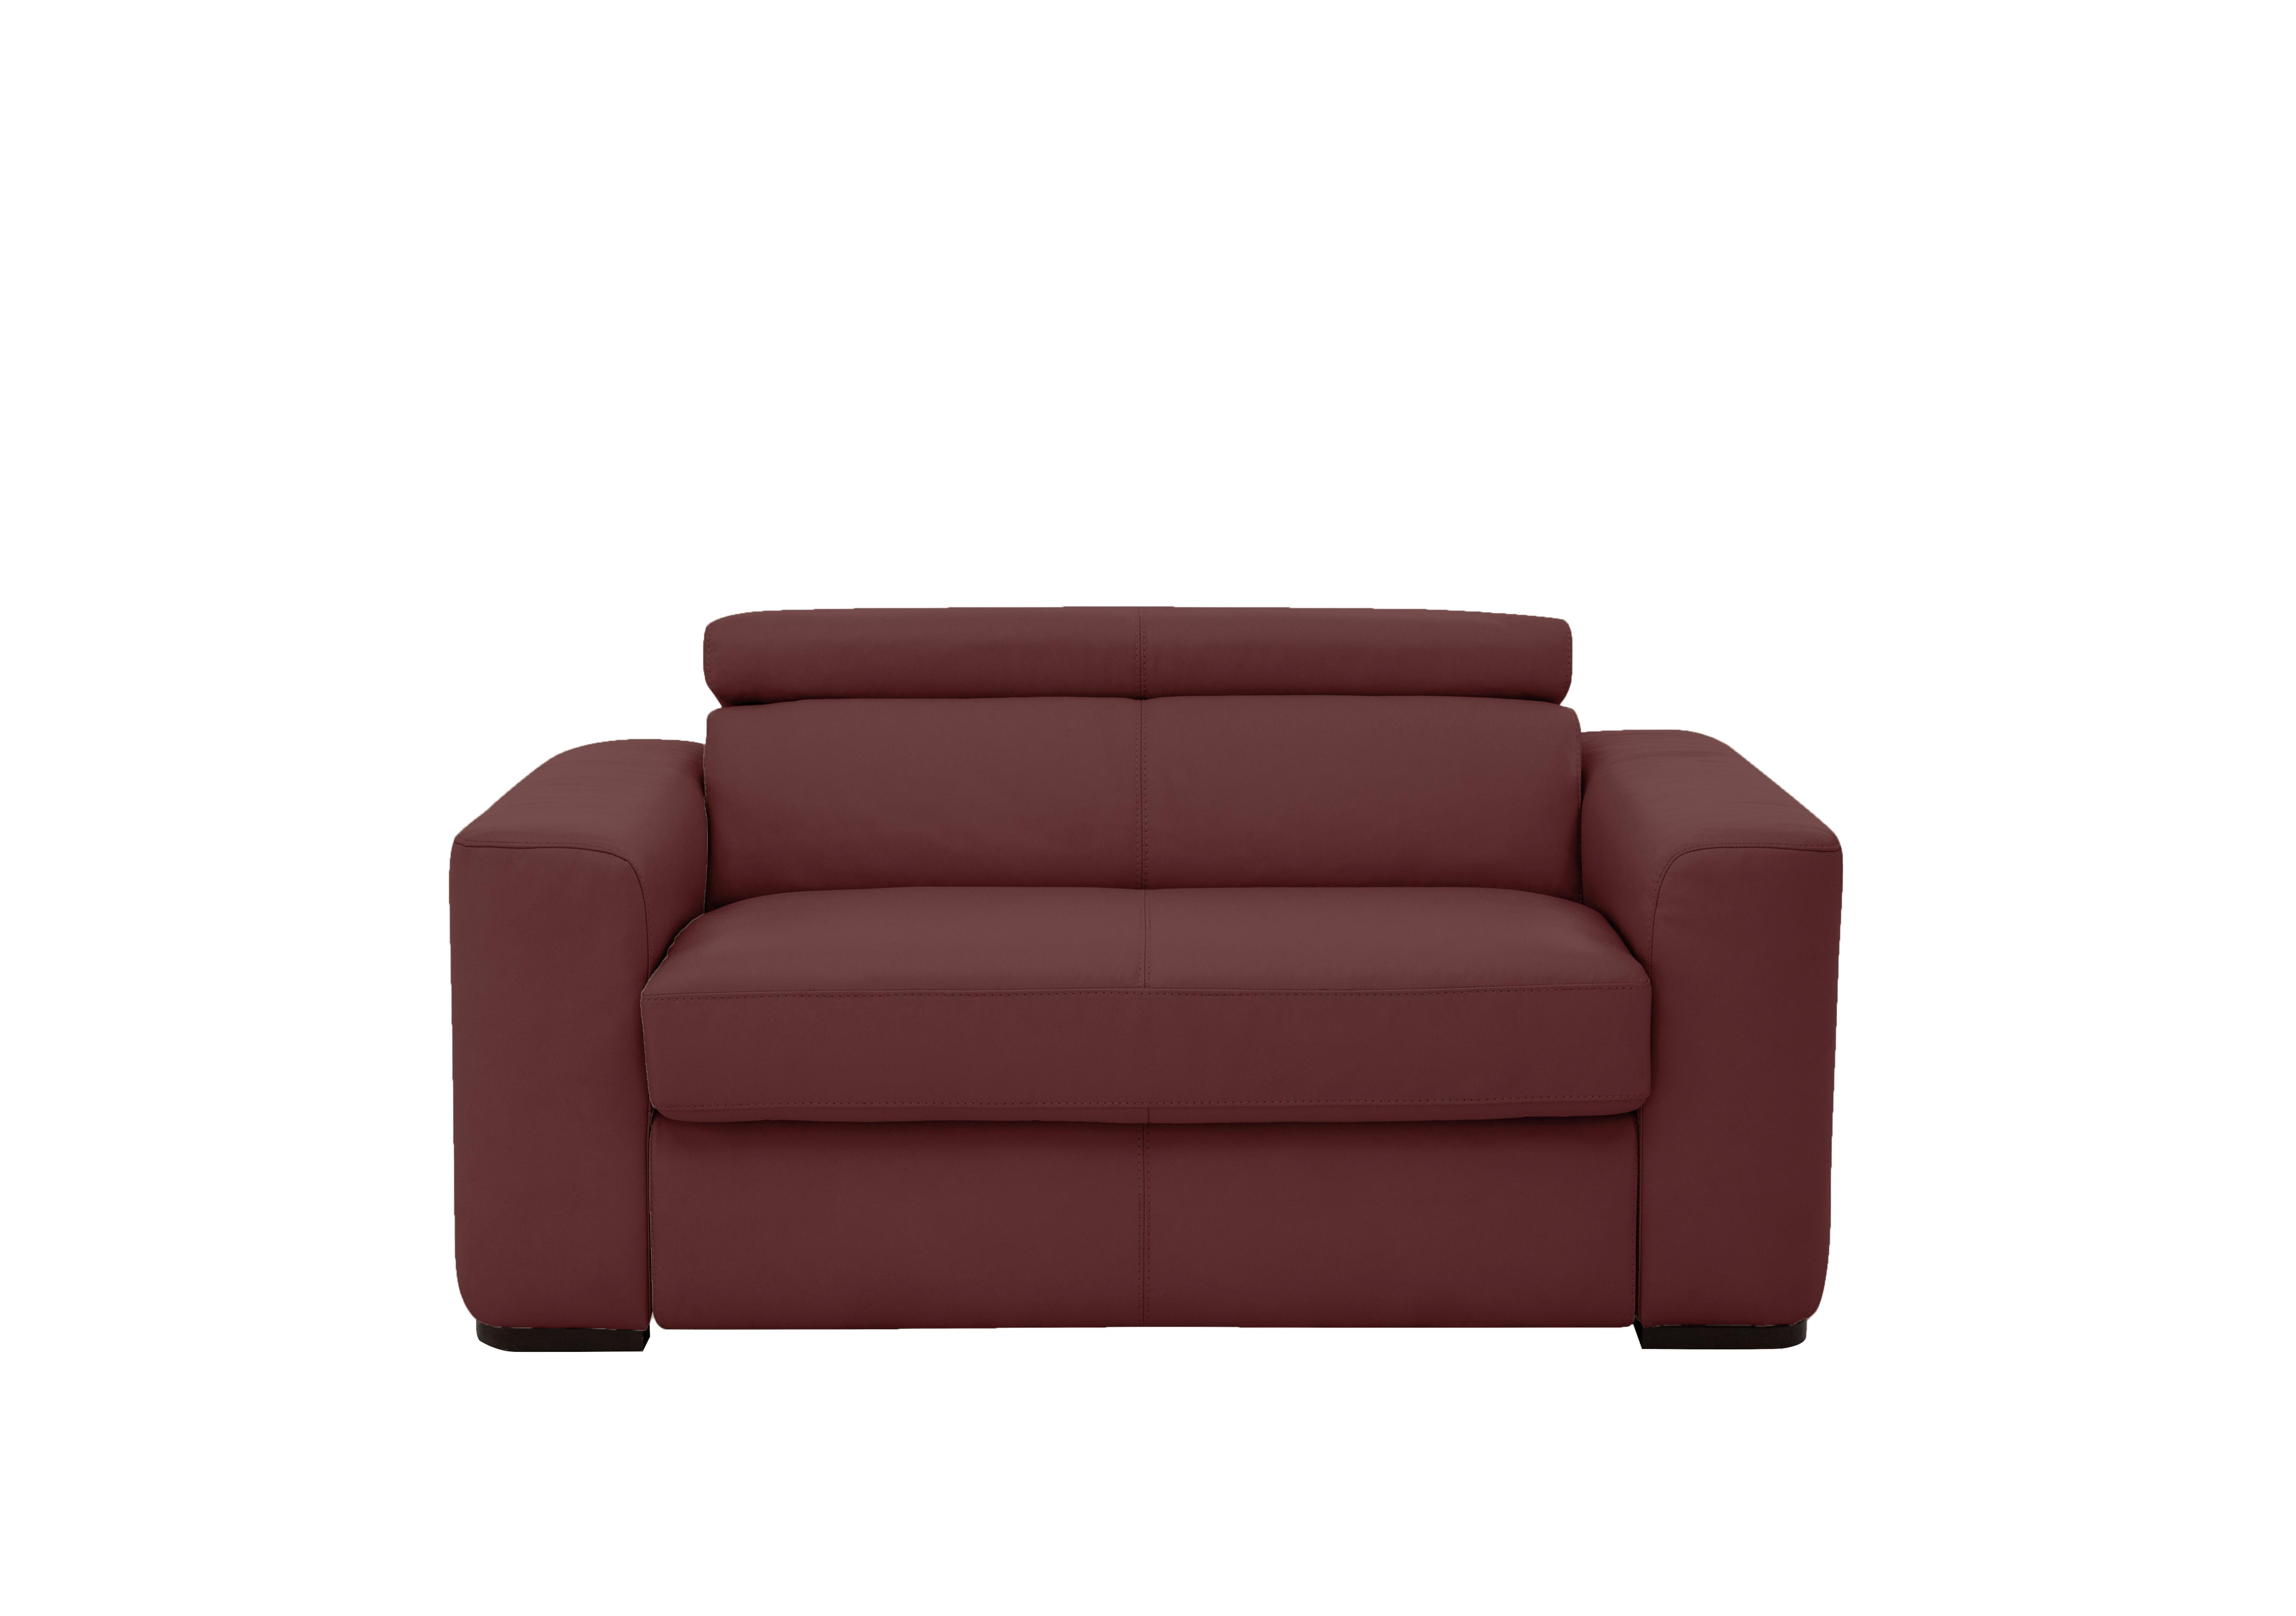 Infinity Leather Chair Sofabed in Bv-035c Deep Red on Furniture Village